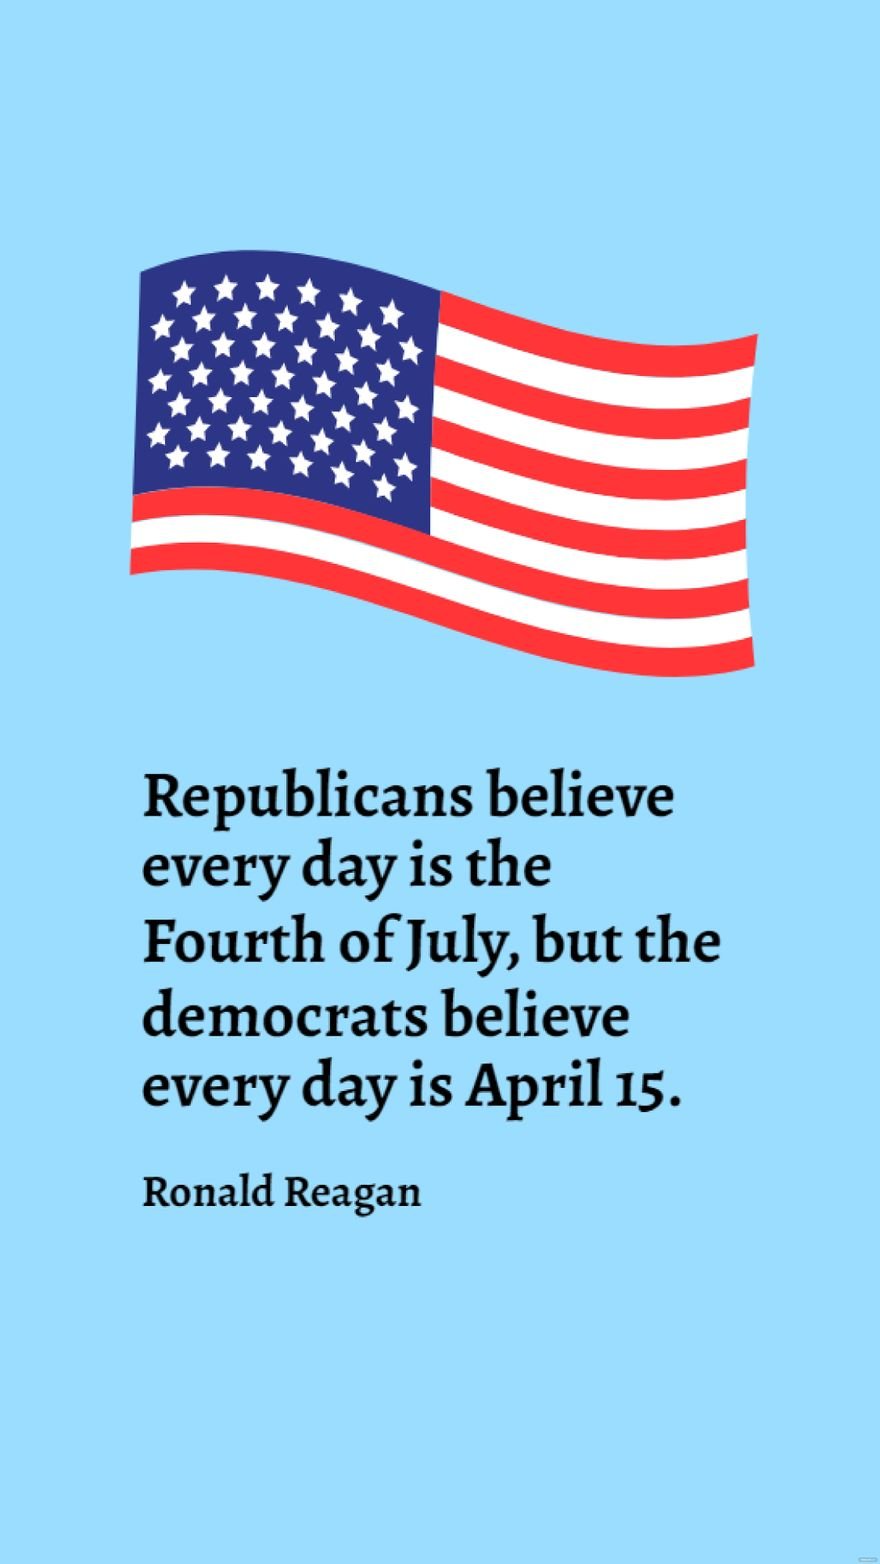 Ronald Reagan - Republicans believe every day is the Fourth of July, but the democrats believe every day is April 15.